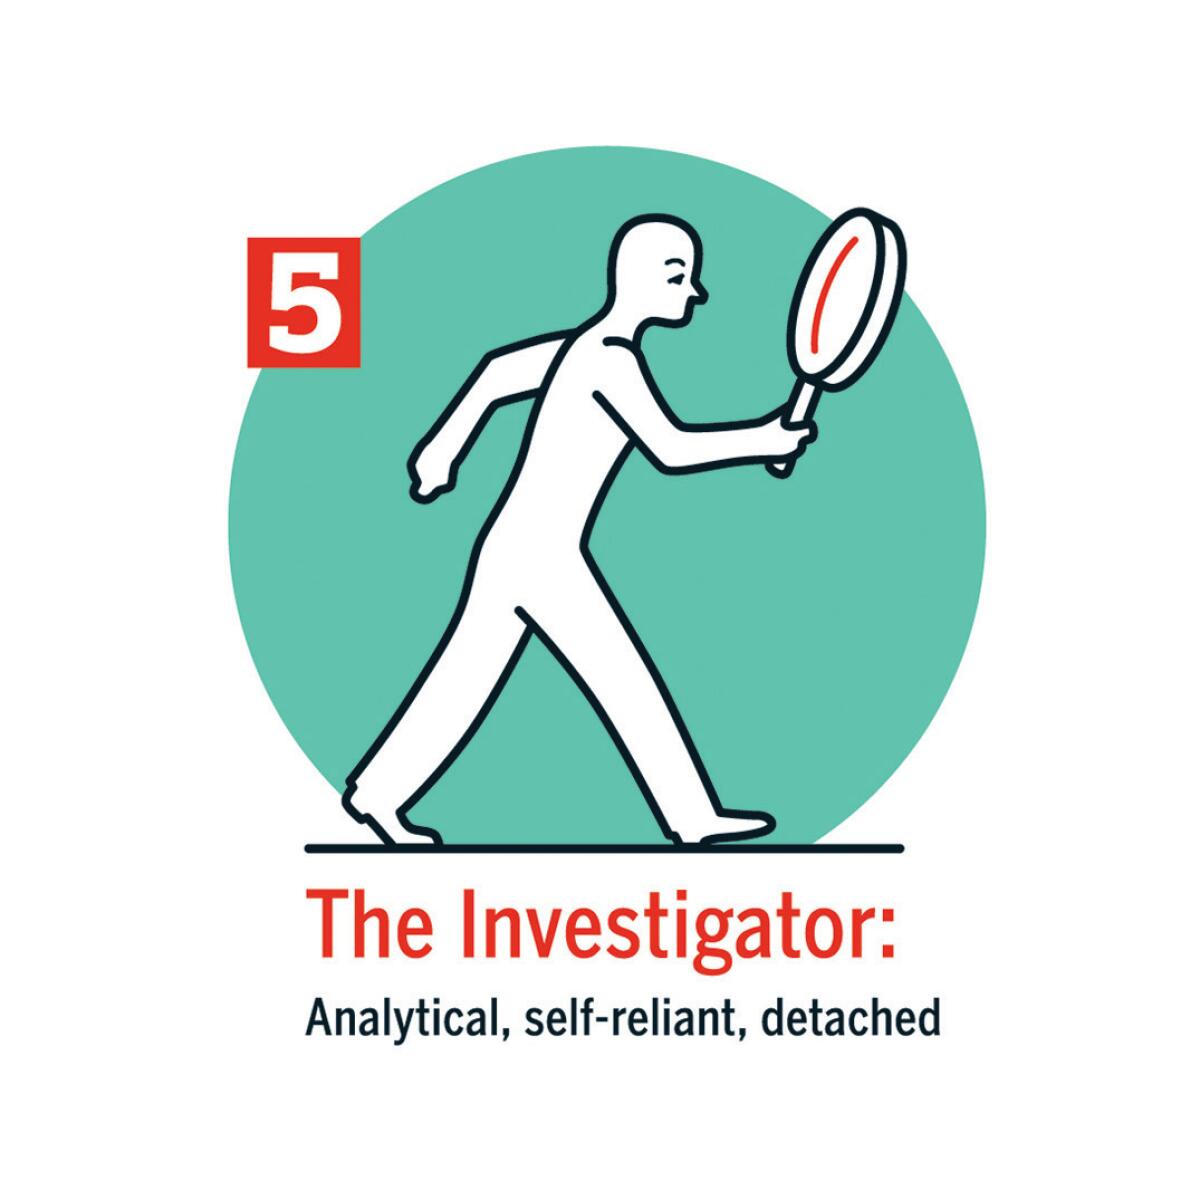 "The Investigator" is analytical, detached.